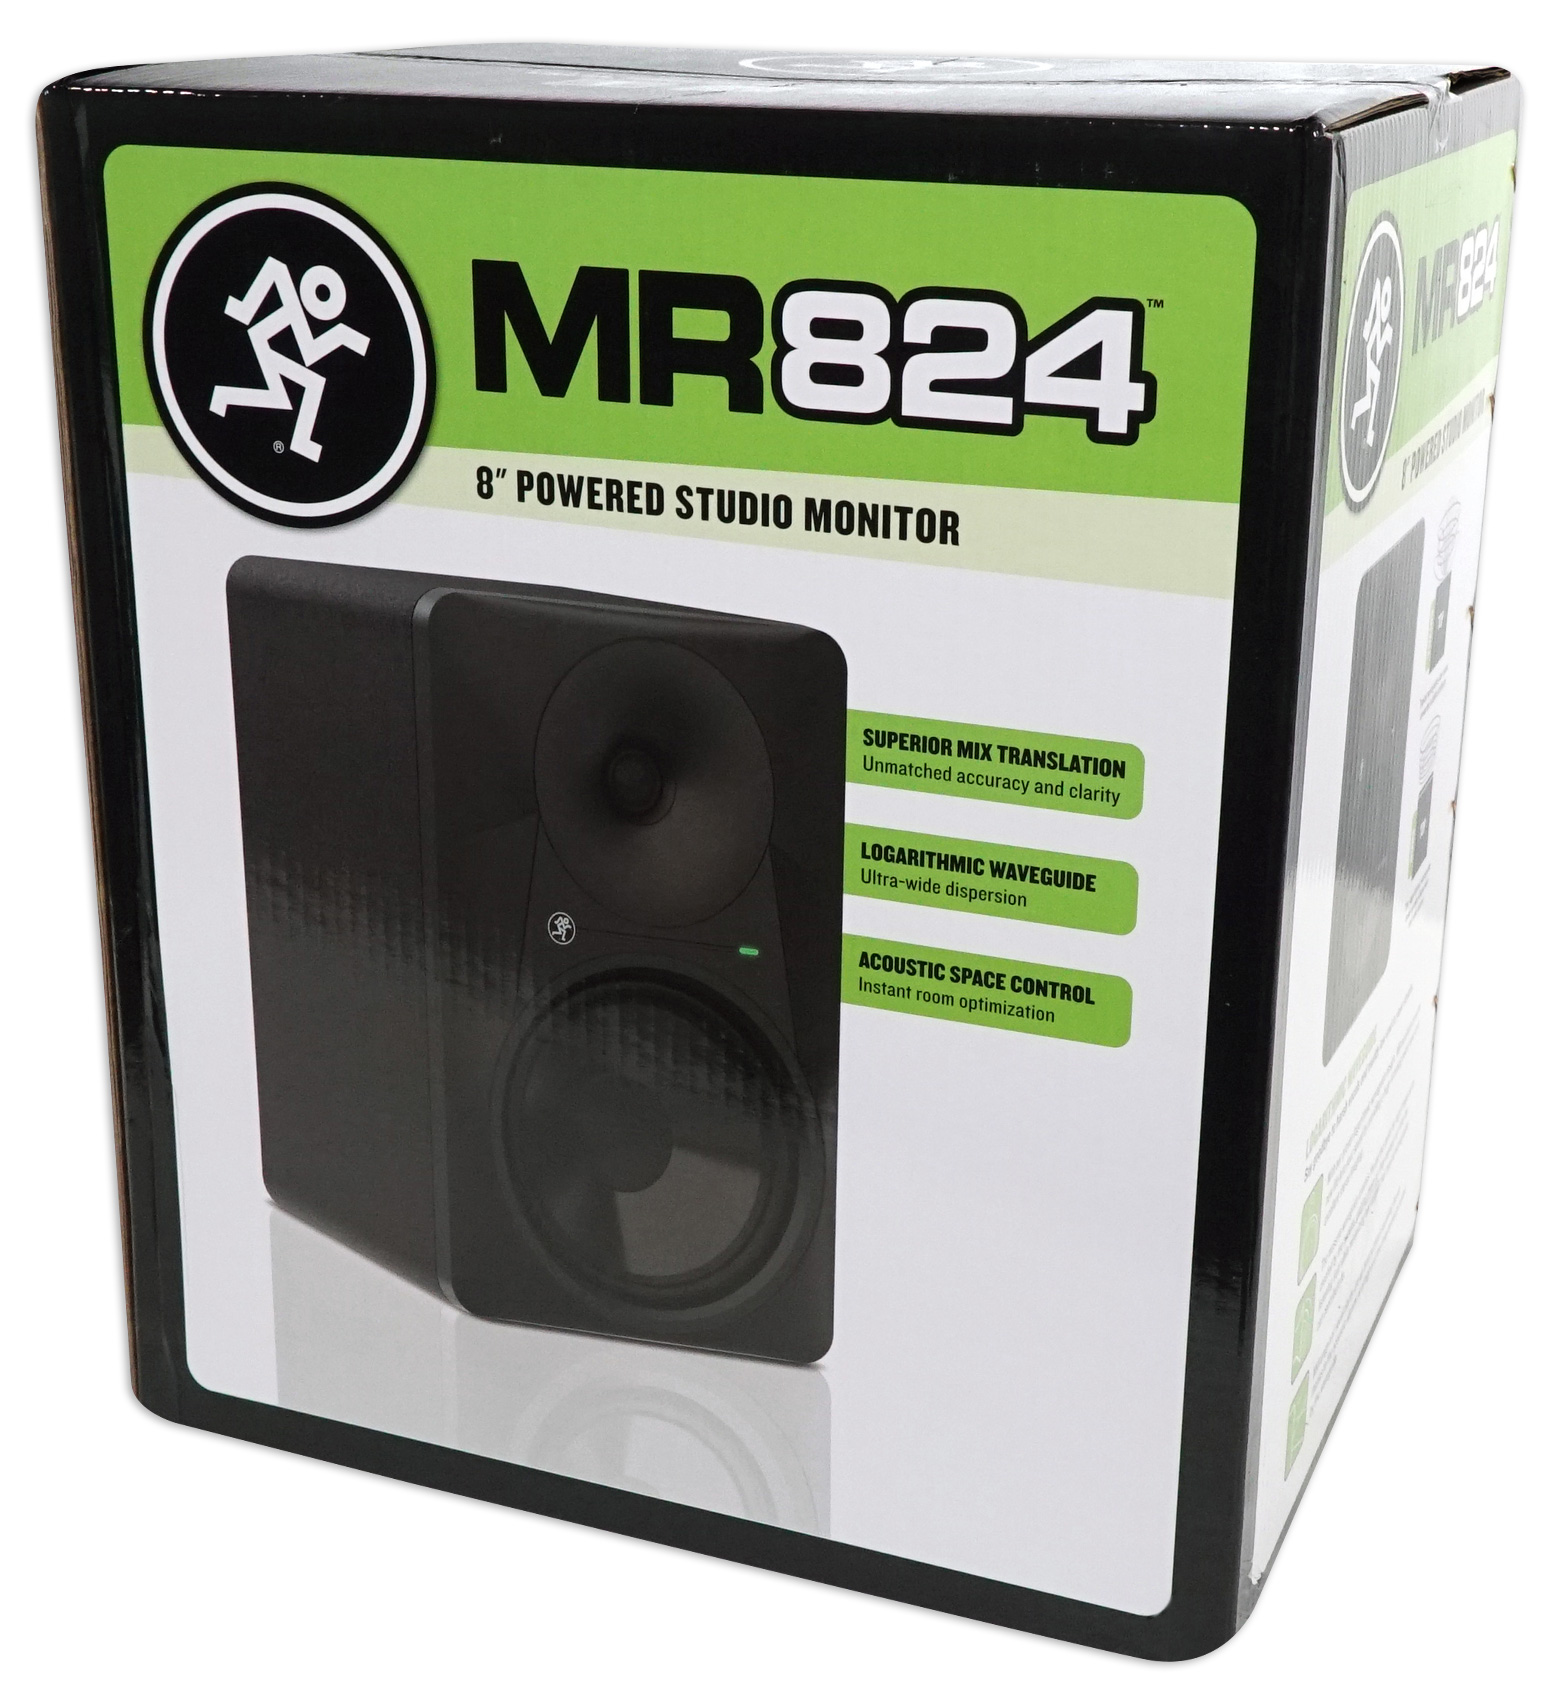 2 Mackie MR824 8” Powered Studio Monitors+10" Active Sub+Mic+Mount+Stands+Pads - image 5 of 10